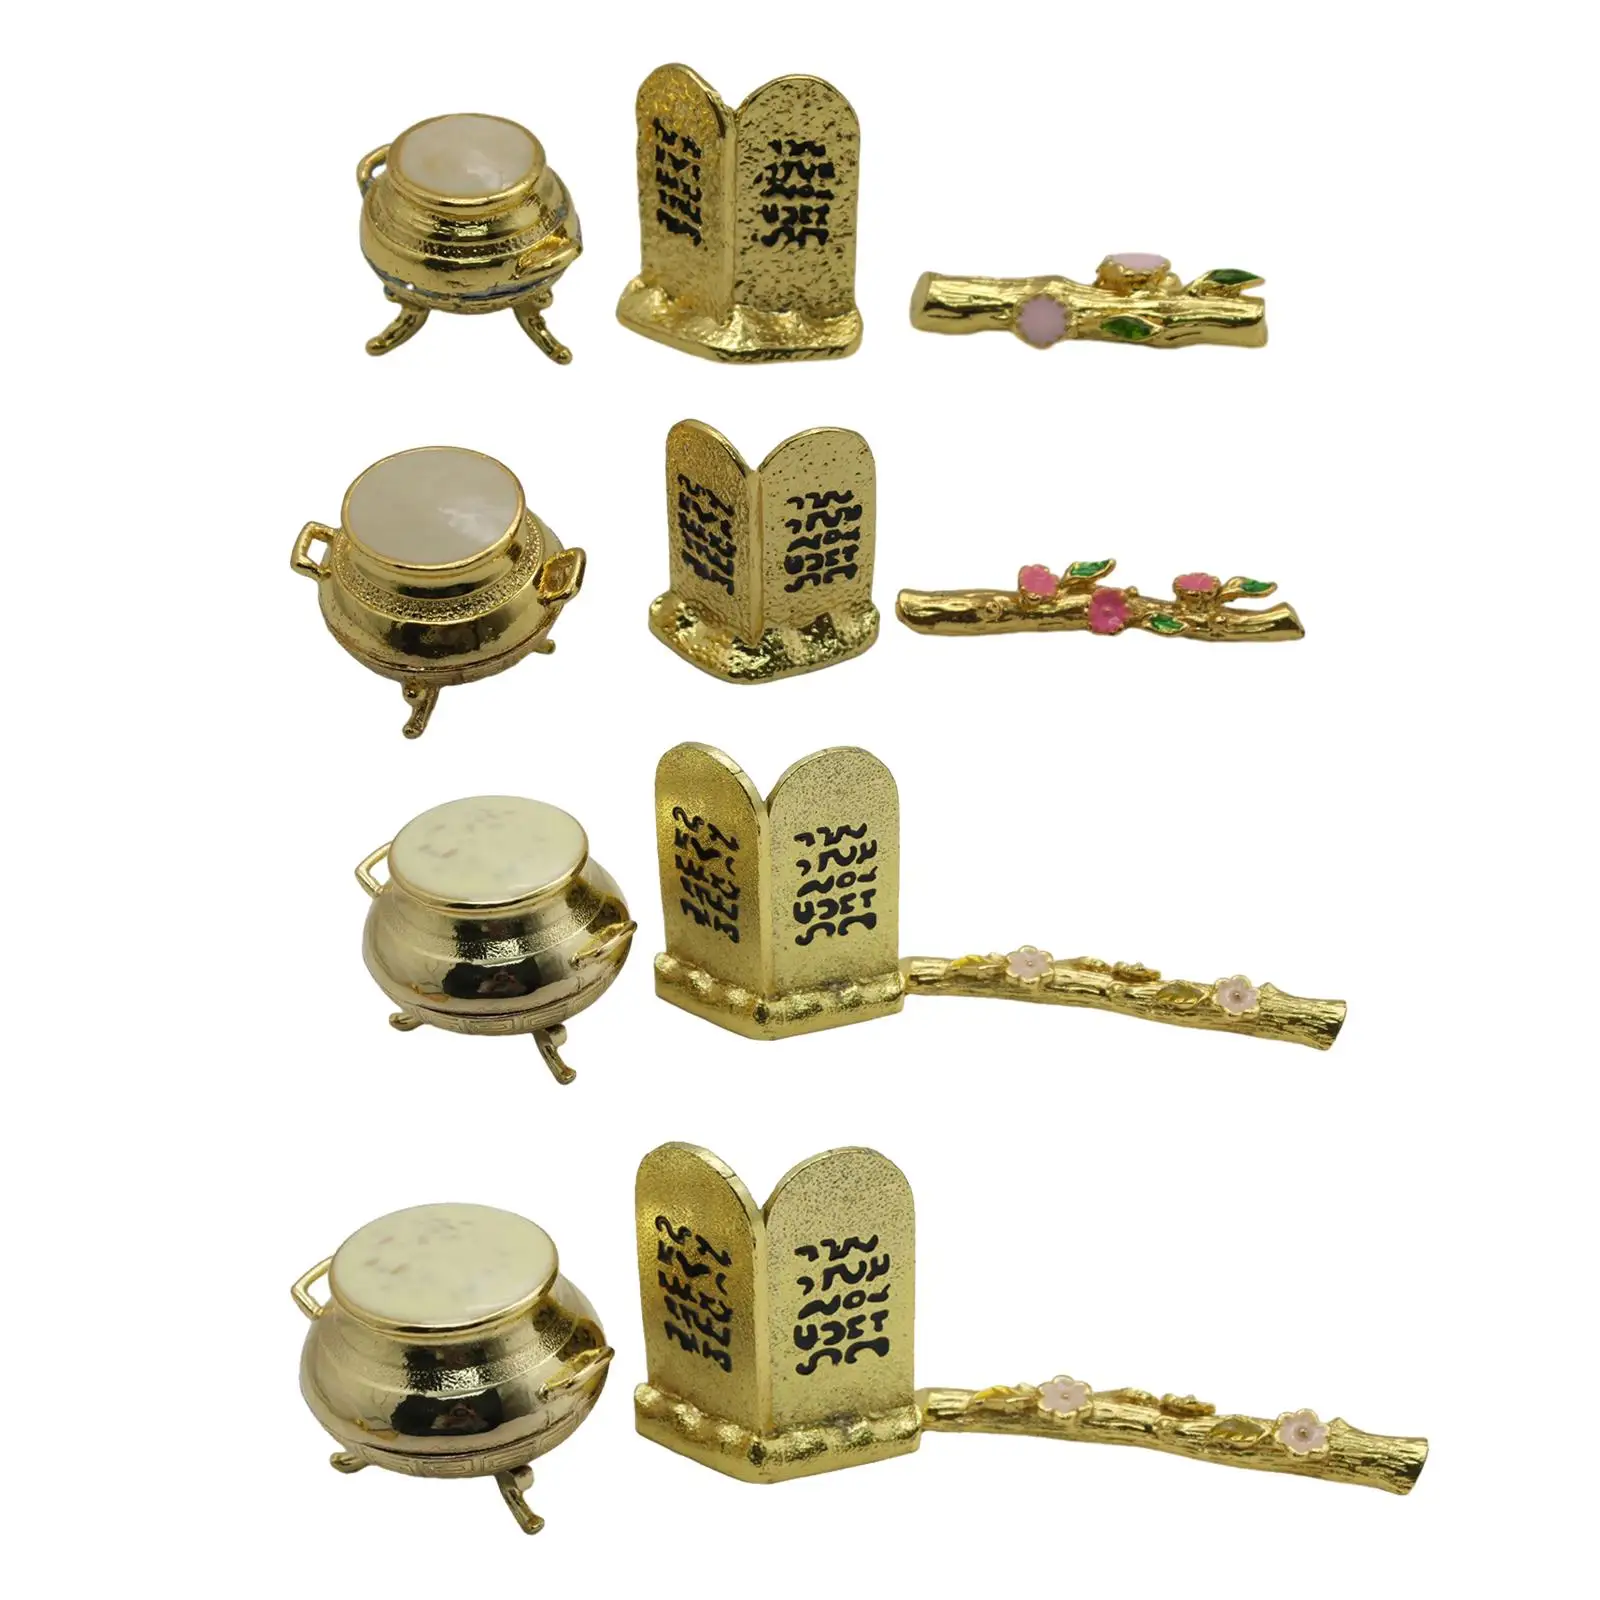 3 Pieces The Ark of Covenant Jewish Temple Utensils for Table Decoration